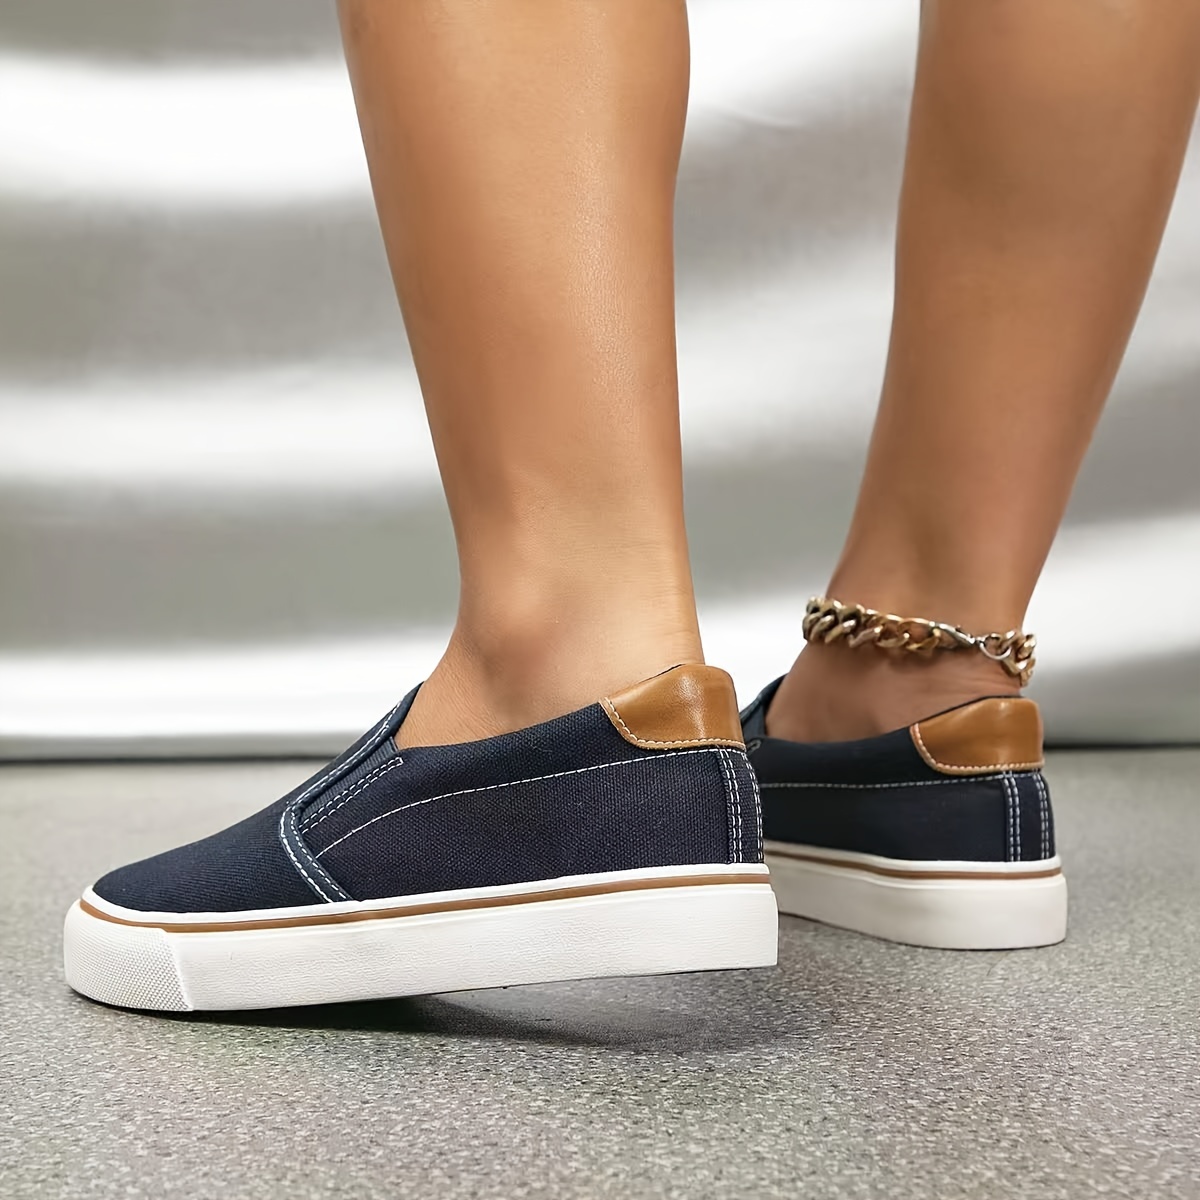 womens unisex solid color canvas shoes casual slip on outdoor shoes comfortable low top shoes details 15